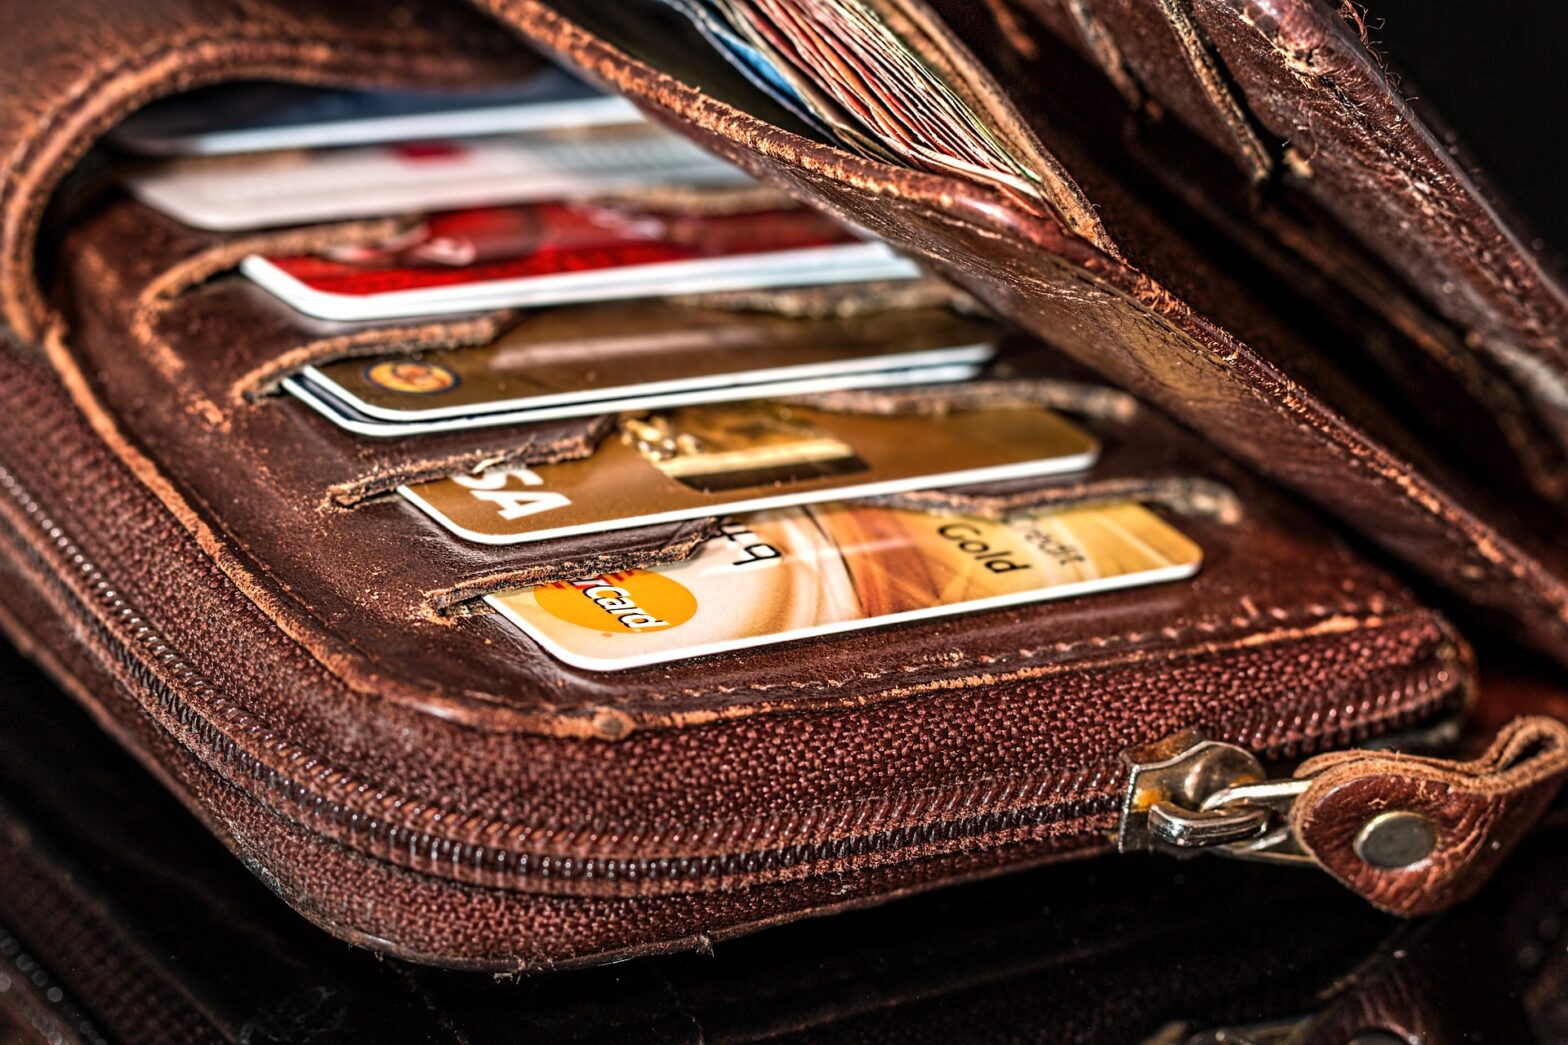 A wallet filled with credit cards.